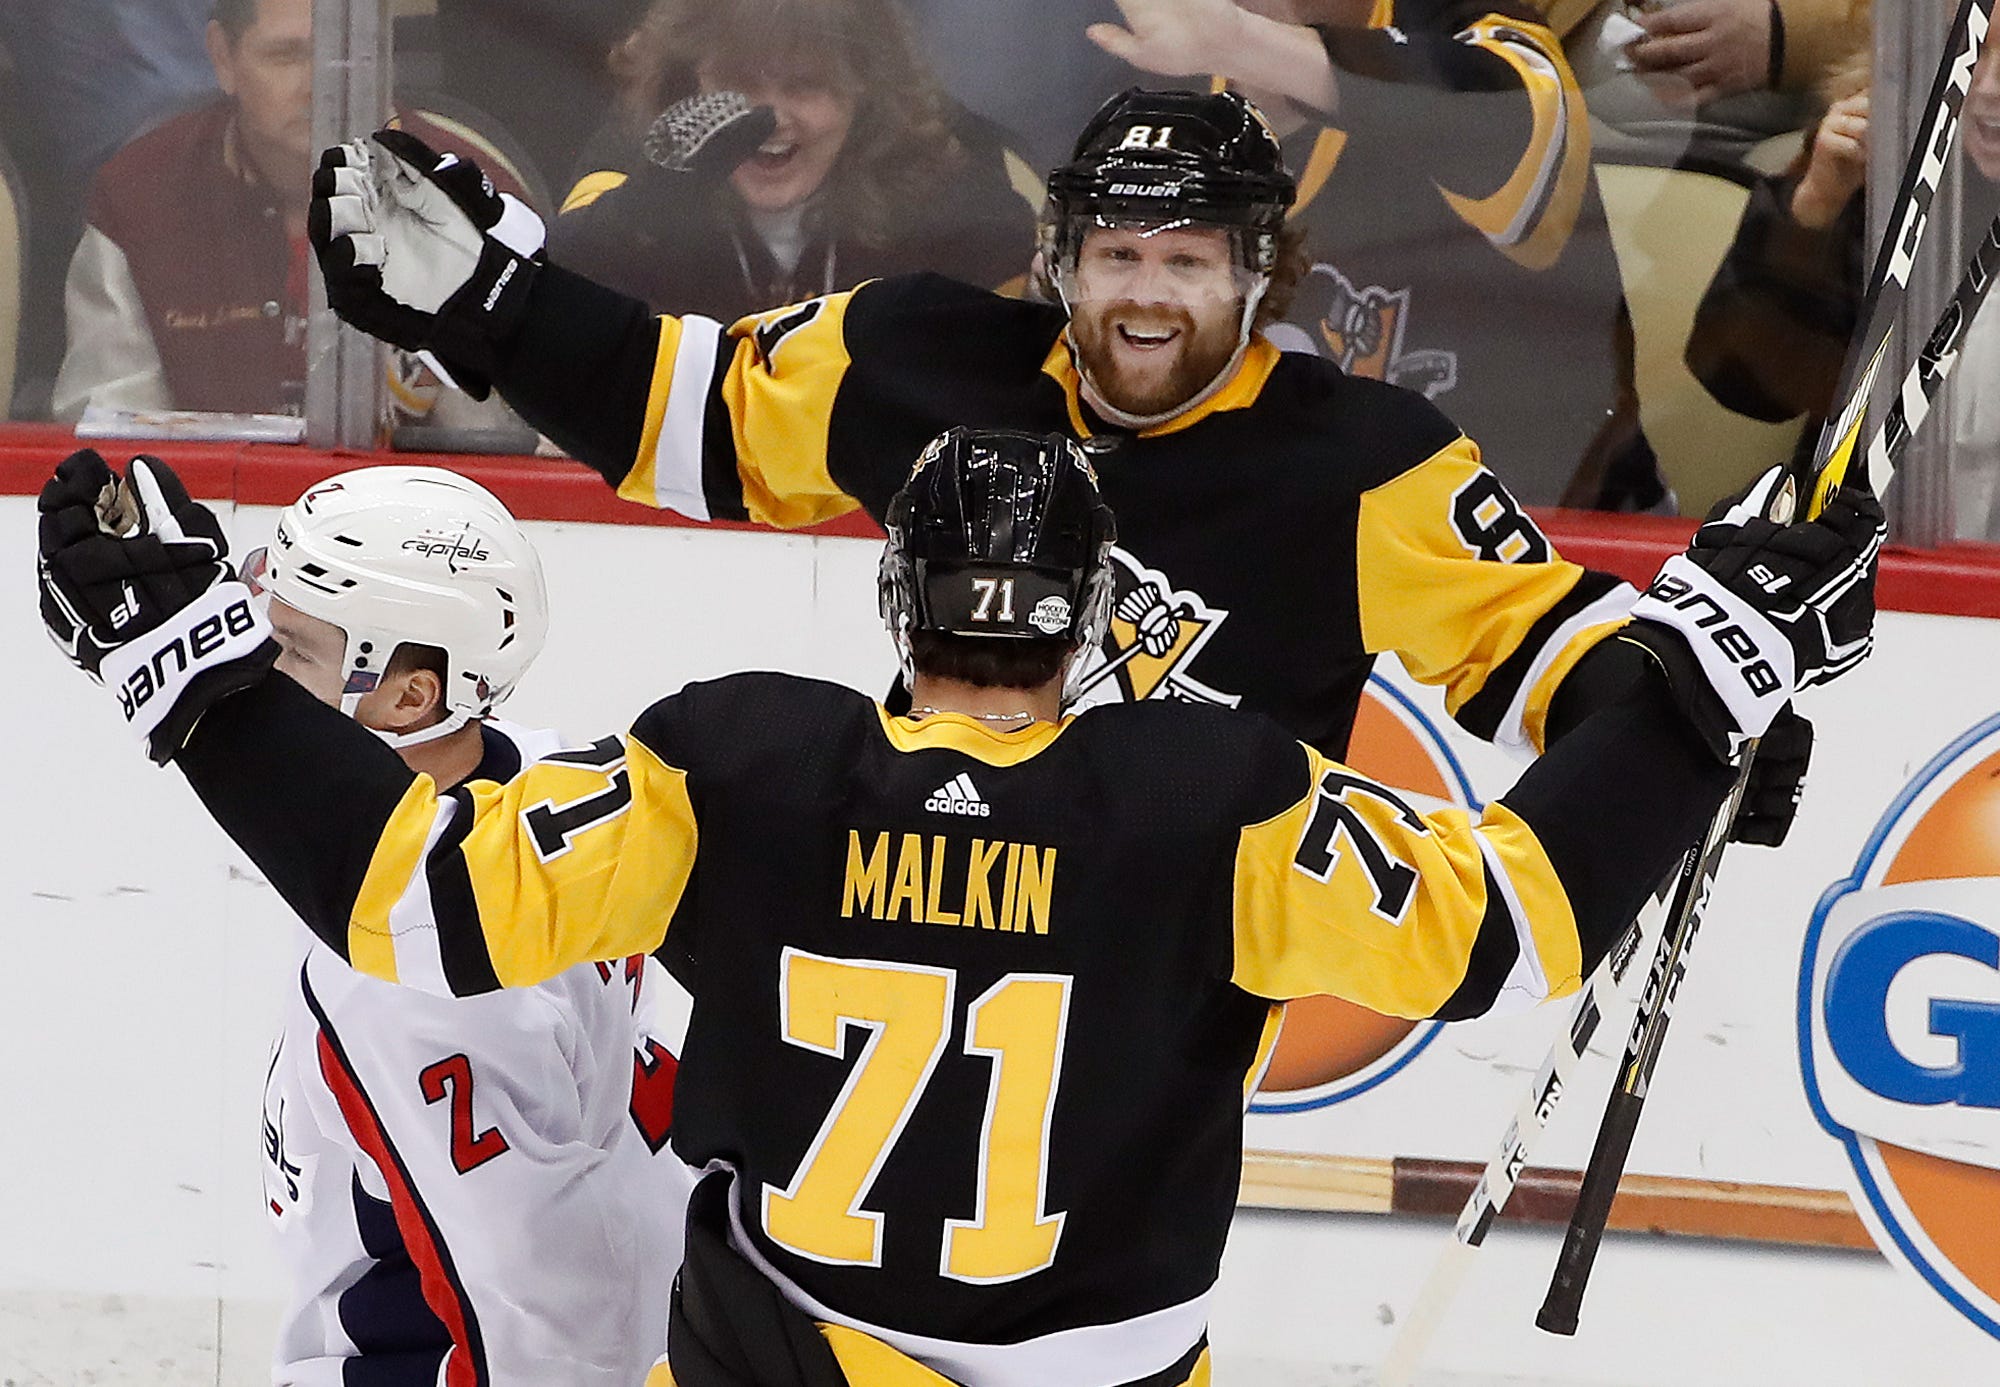 Could big-name players like P.K. Subban, Evgeni Malkin, Phil Kessel, James Neal get traded this offseason?